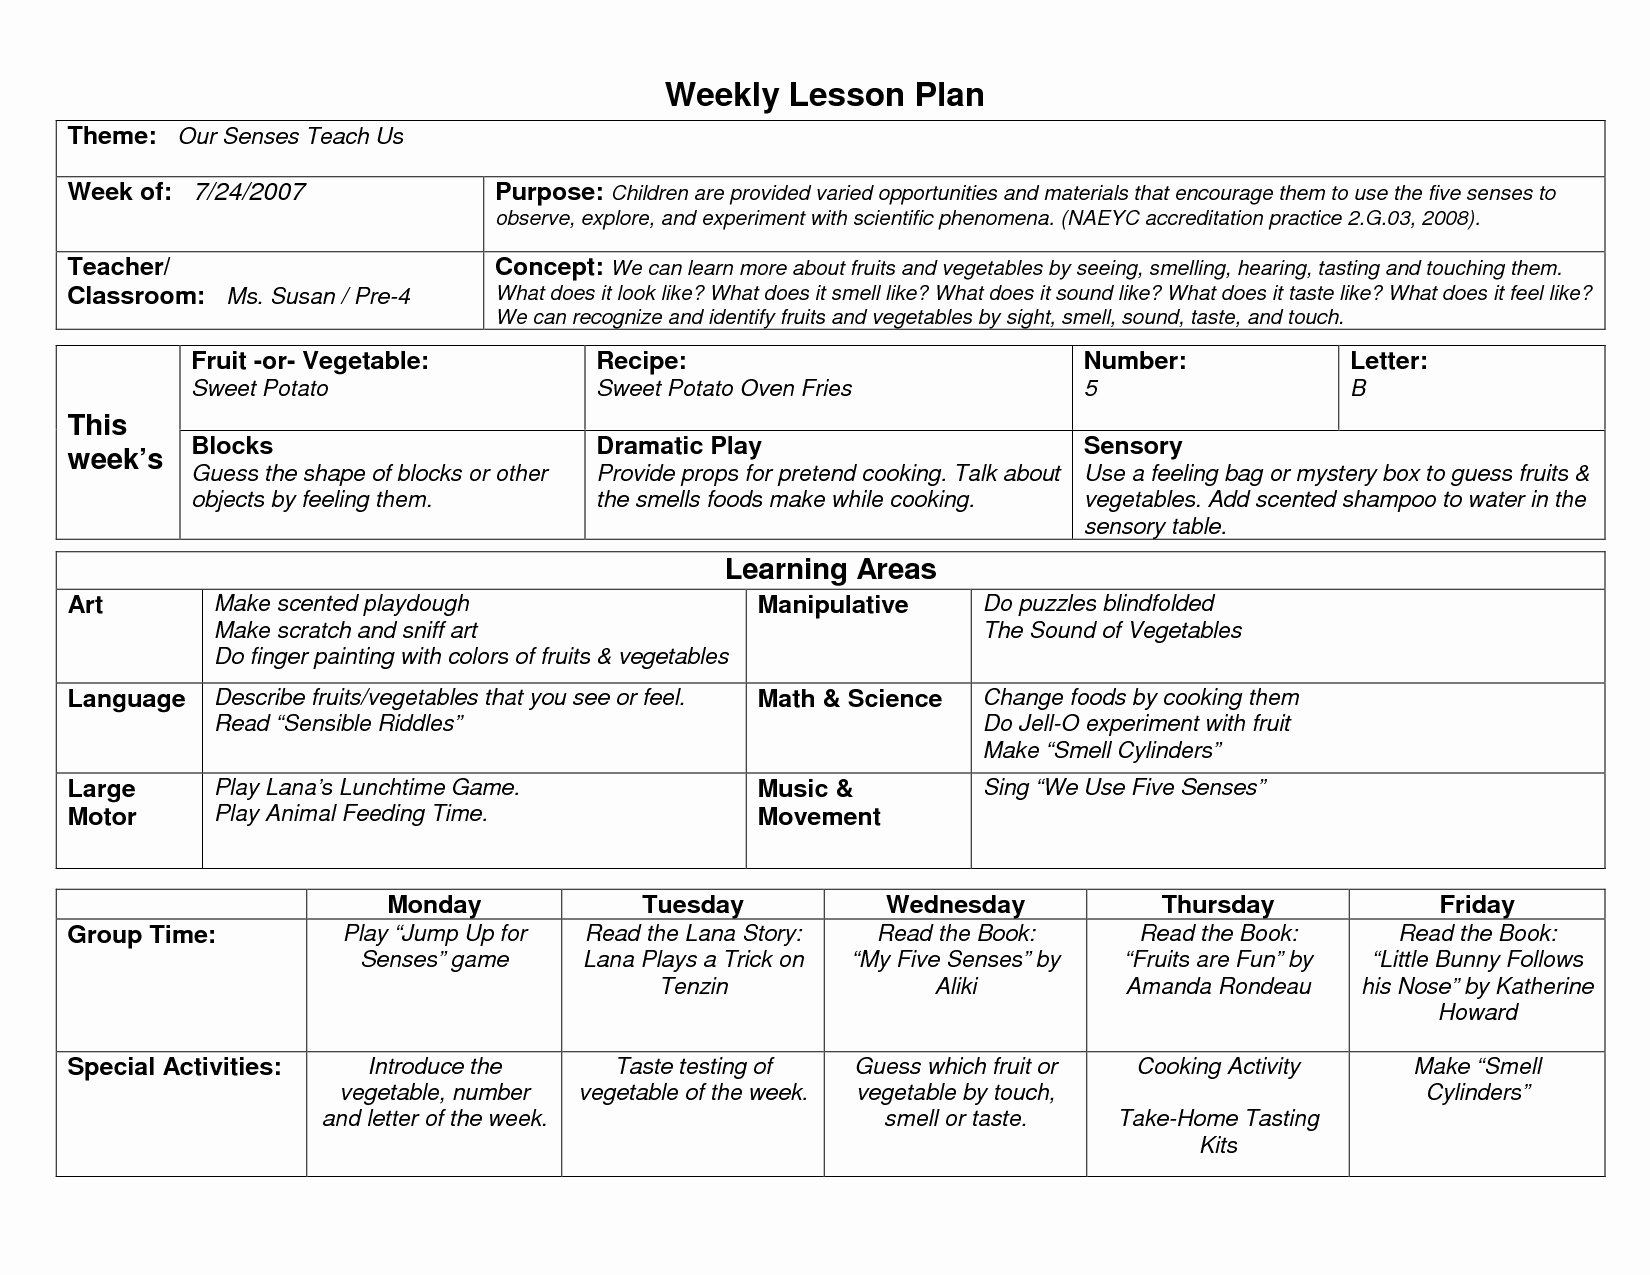 Blank Weekly Lesson Plan Template Fresh Naeyc Lesson Plan Template for Preschool